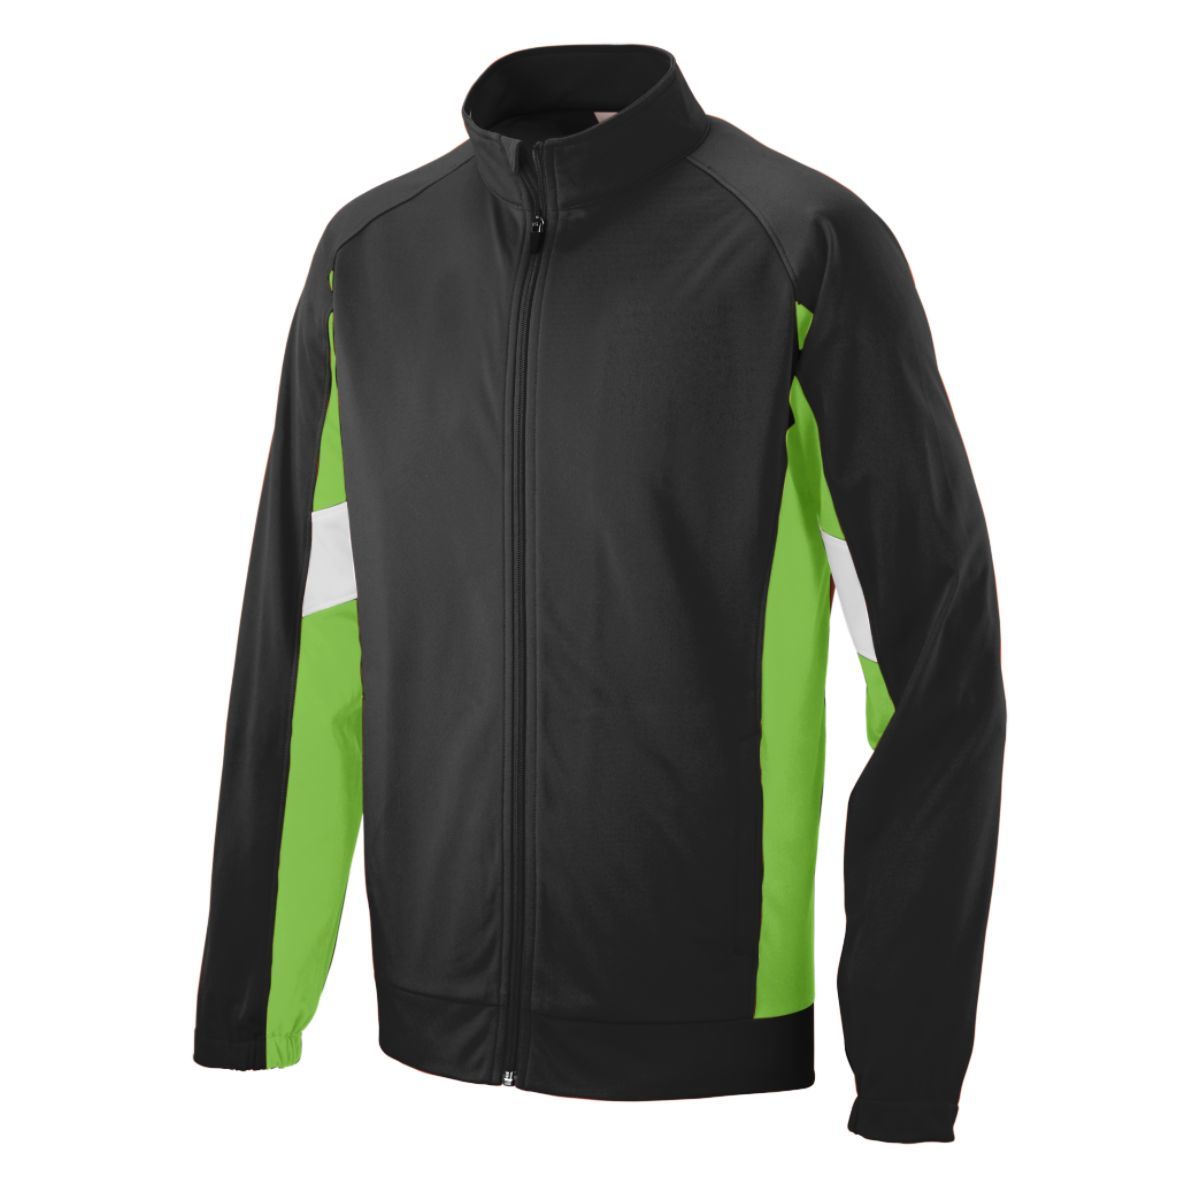 Augusta Sportswear Tour De Force Jacket in Black/Lime/White  -Part of the Adult, Adult-Jacket, Augusta-Products, Outerwear product lines at KanaleyCreations.com